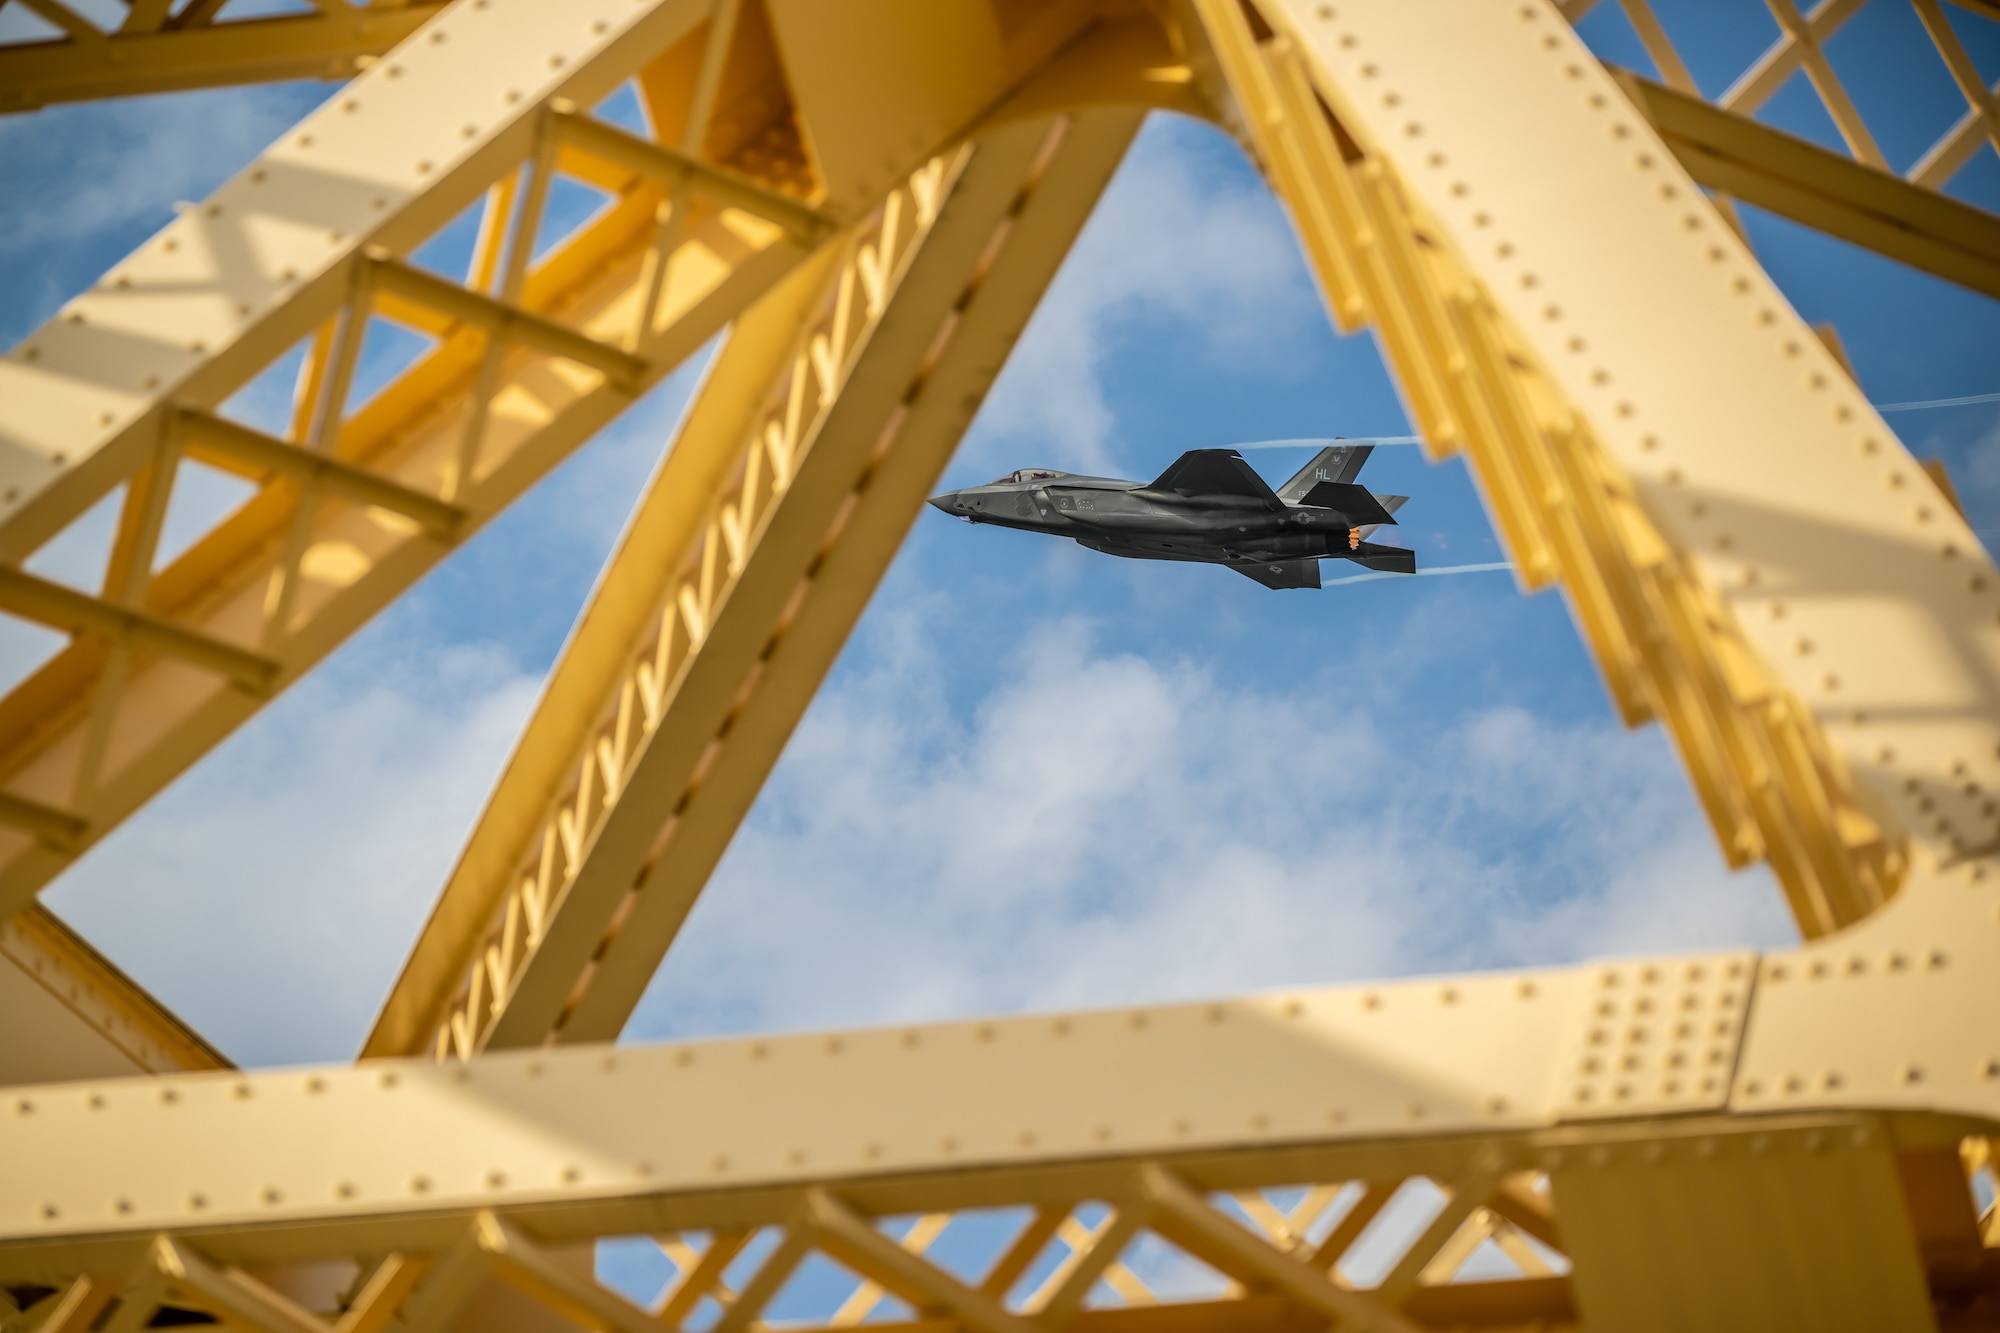 An aircraft from the U.S. Air Force F-35A Lightning II Demo Team, piloted by Maj. Kristin Wolfe, performs an aerial demonstration along the banks of the Ohio River in downtown Louisville, Ky., April 22, 2023, as part of the annual Thunder Over Louisville air show. This year’s event featured more than 20 military and civilian planes, including a C-130J Super Hercules from the Kentucky Air National Guard, which served as the base of operations for military aircraft participating in the show. (U.S. Air National Guard photo by Dale Greer)